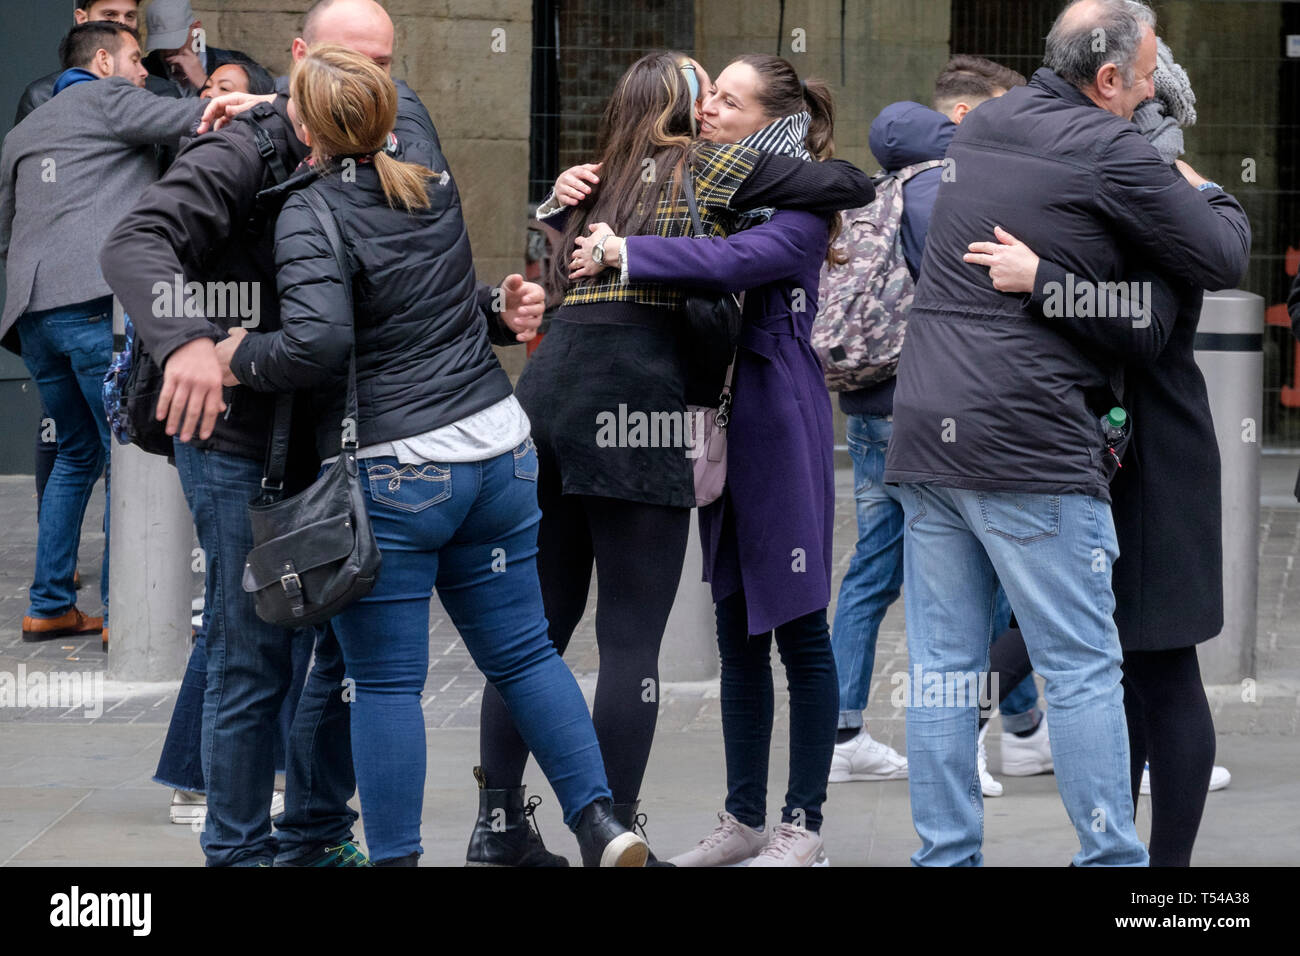 A group of people embrace as they meet on London street. Stock Photo